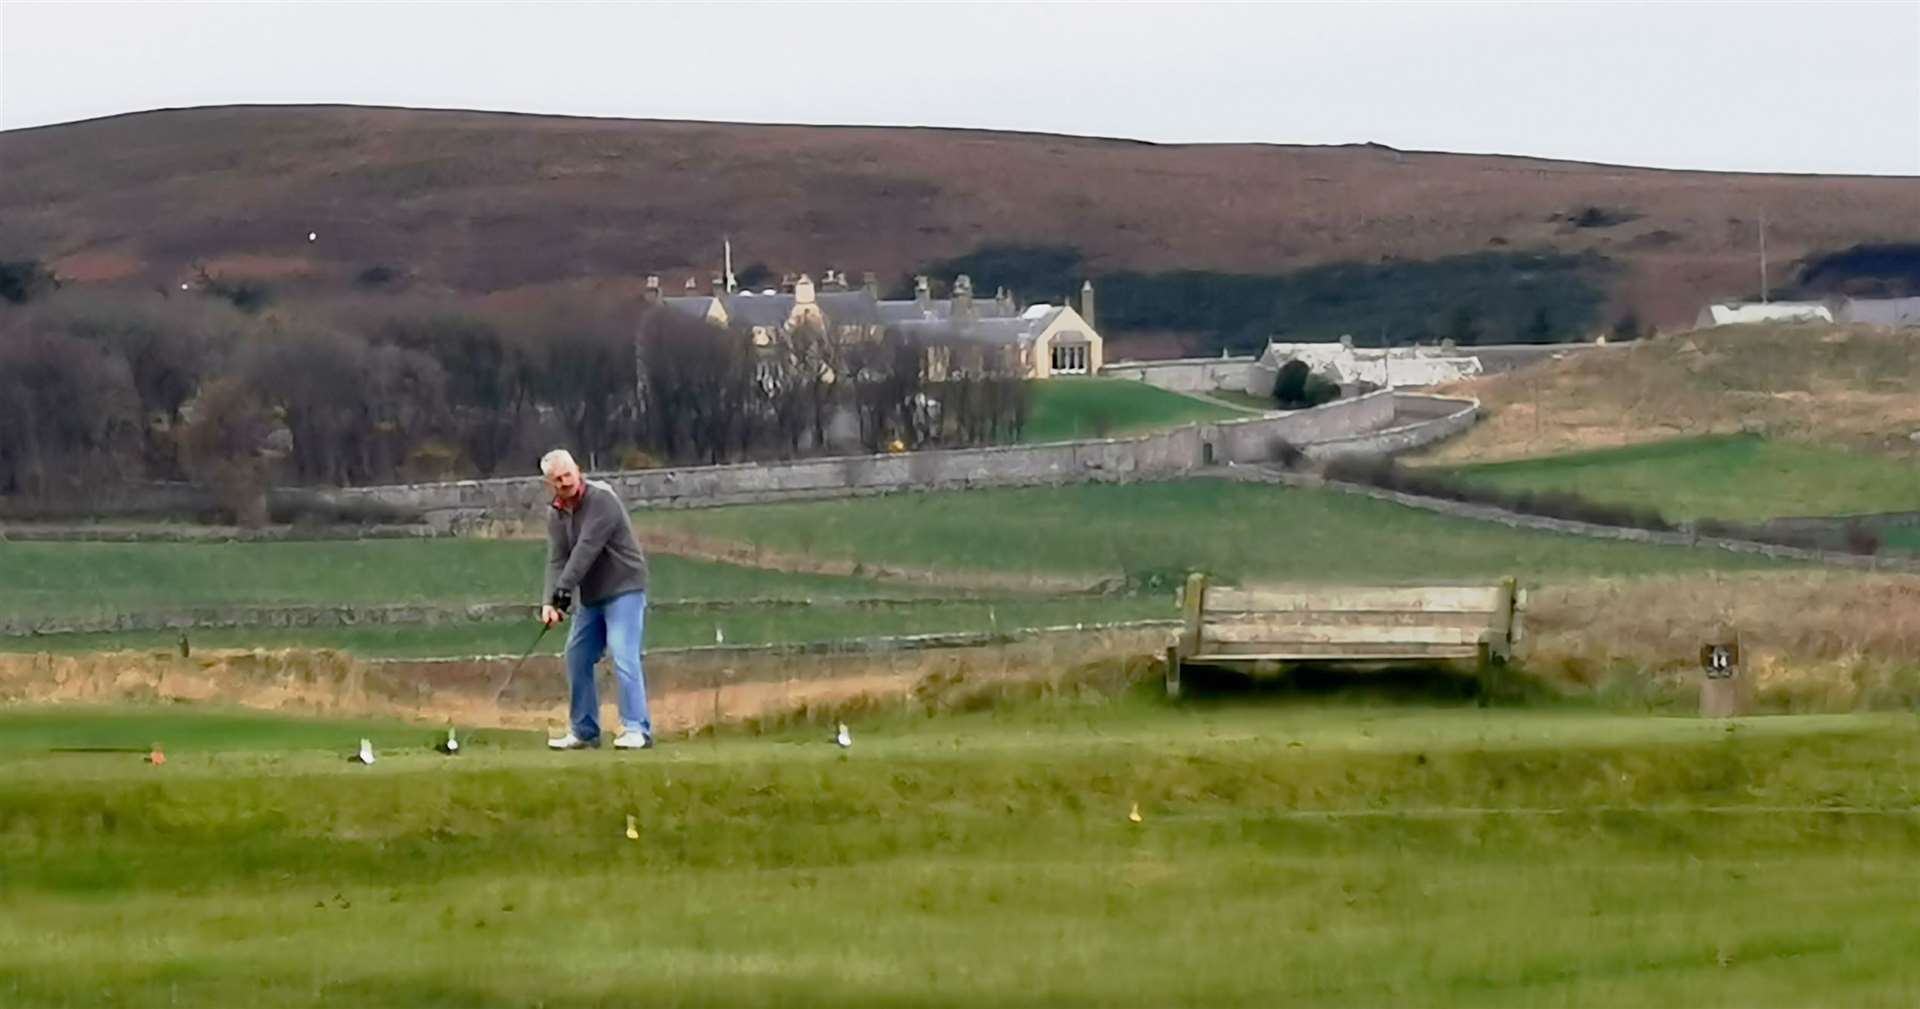 Bruce Mackay, winner of round seven of the winter league Stableford competition, teeing off at the 14th hole.